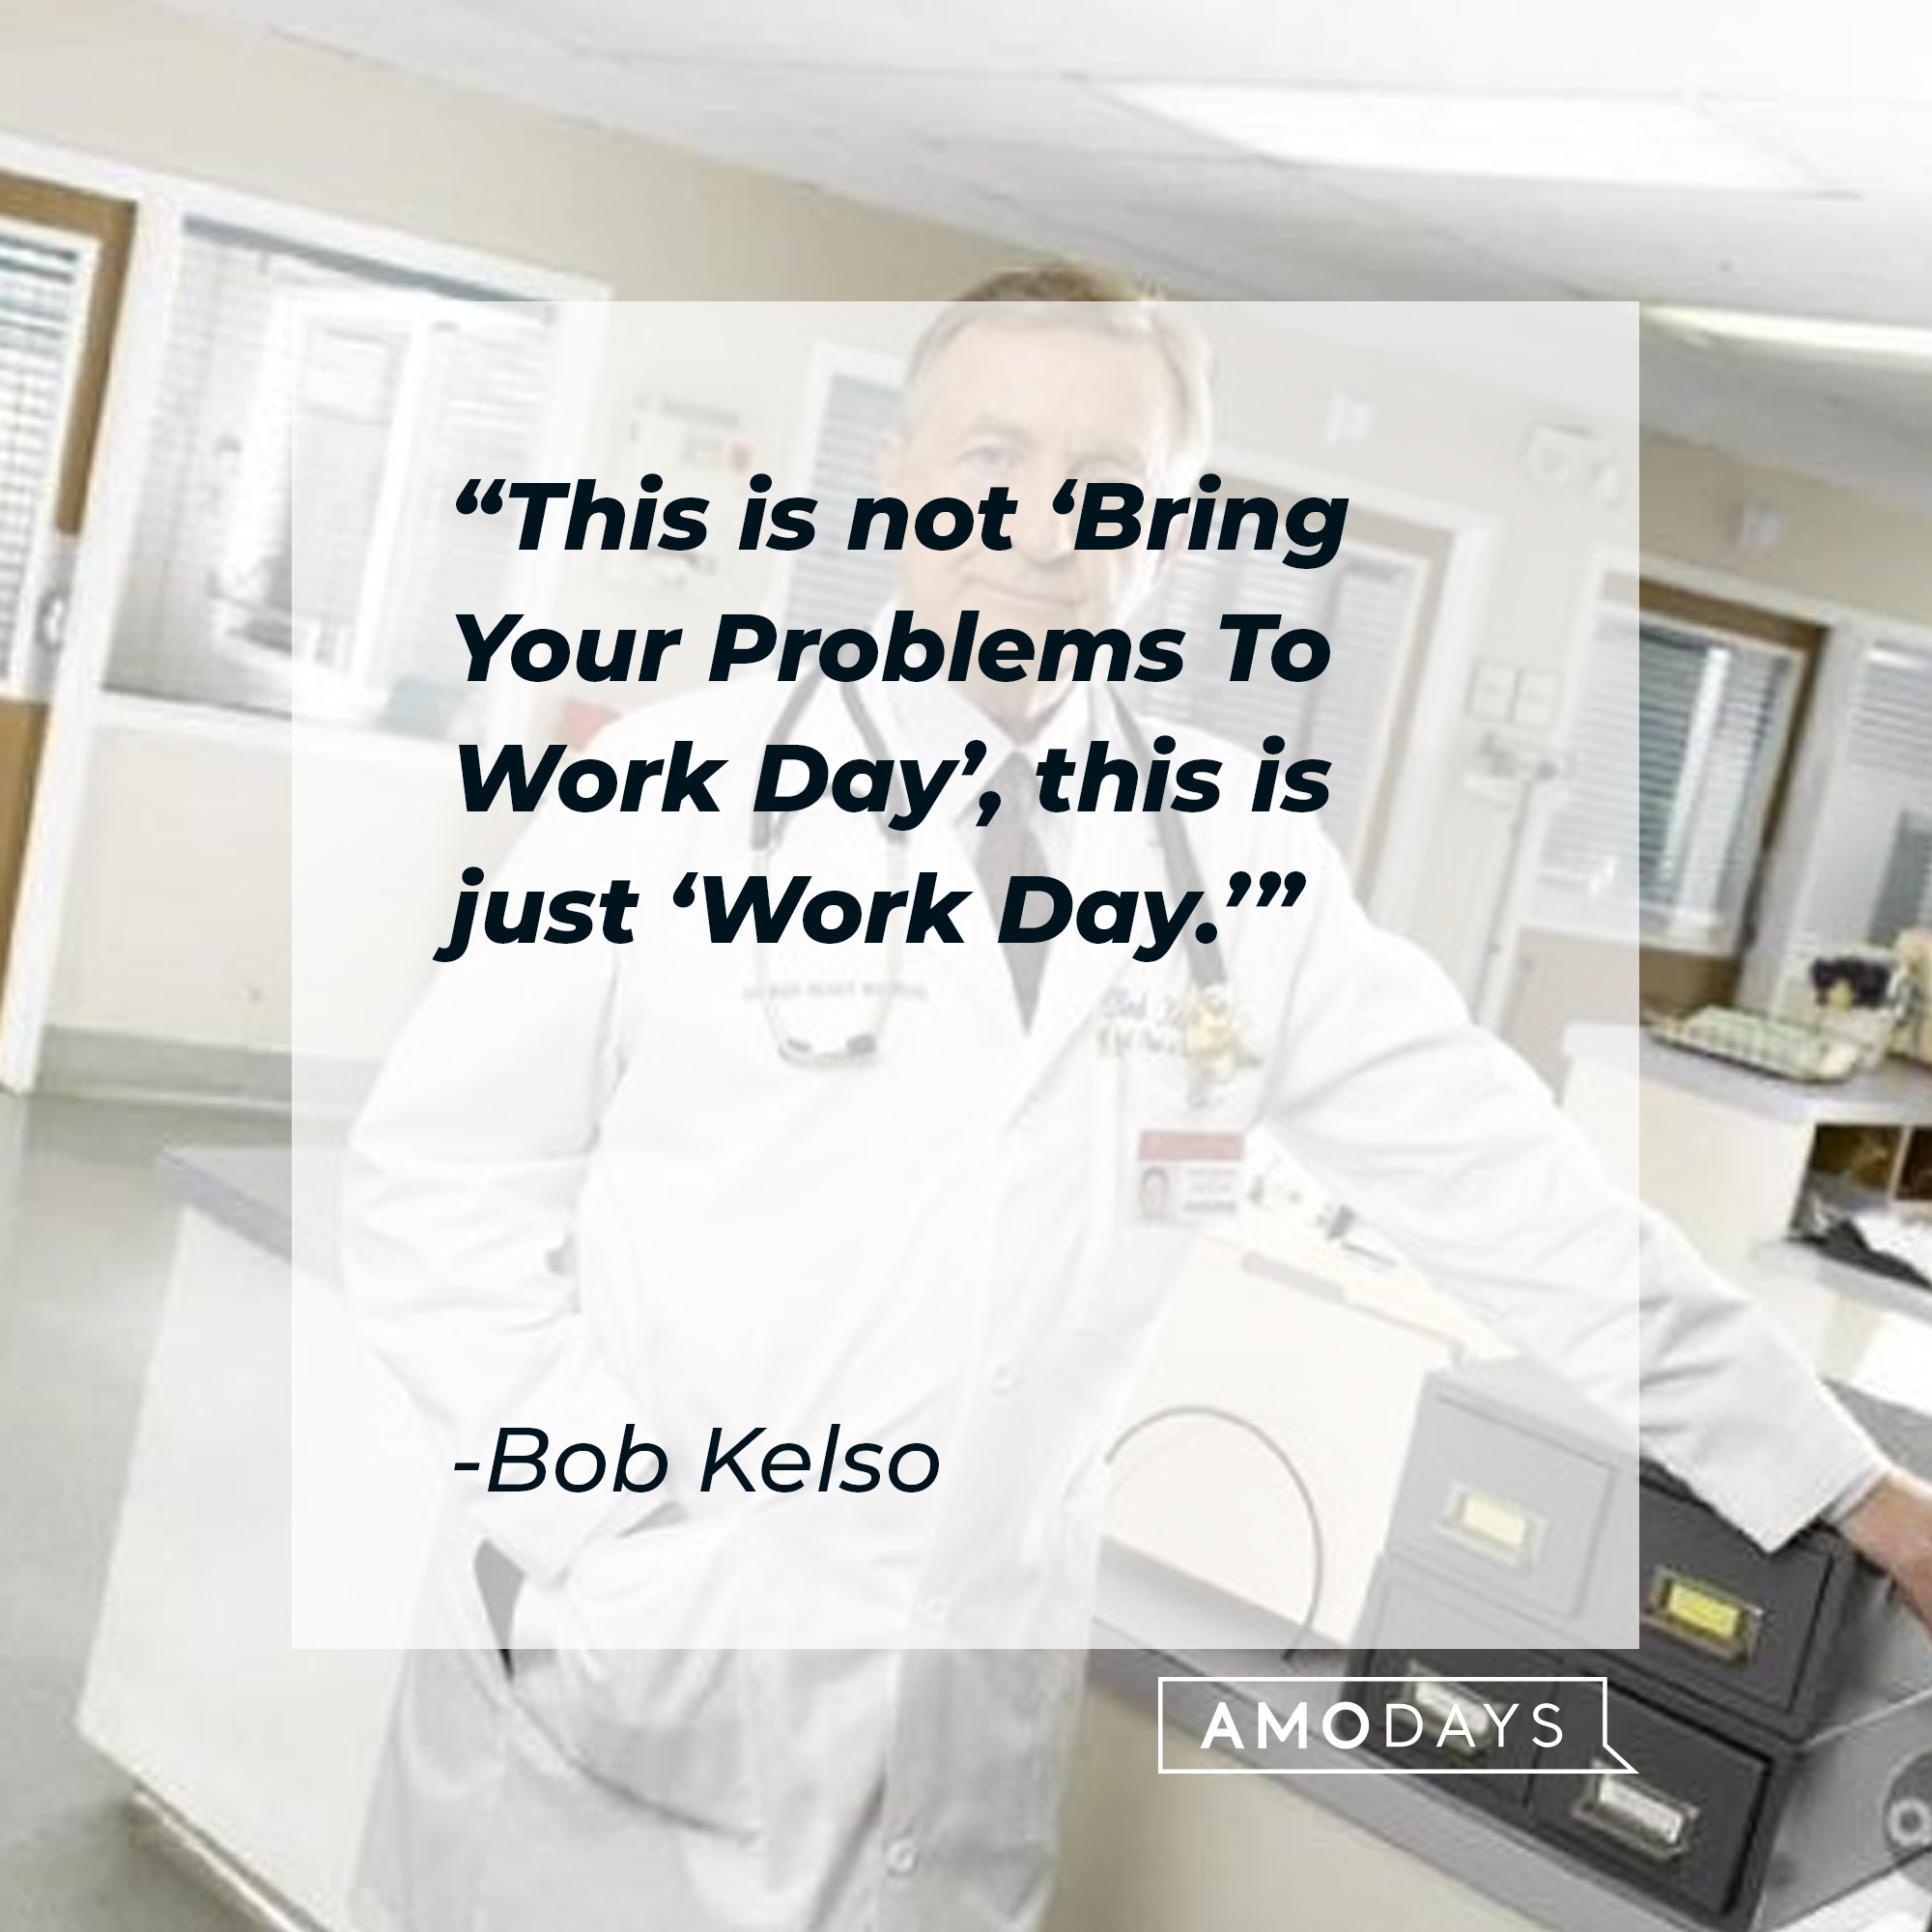 Bob Kelso with his quote: “This is not 'Bring Your Problems To Work Day', this is just 'Work Day.'” | Source: Facebook.com/scrubs